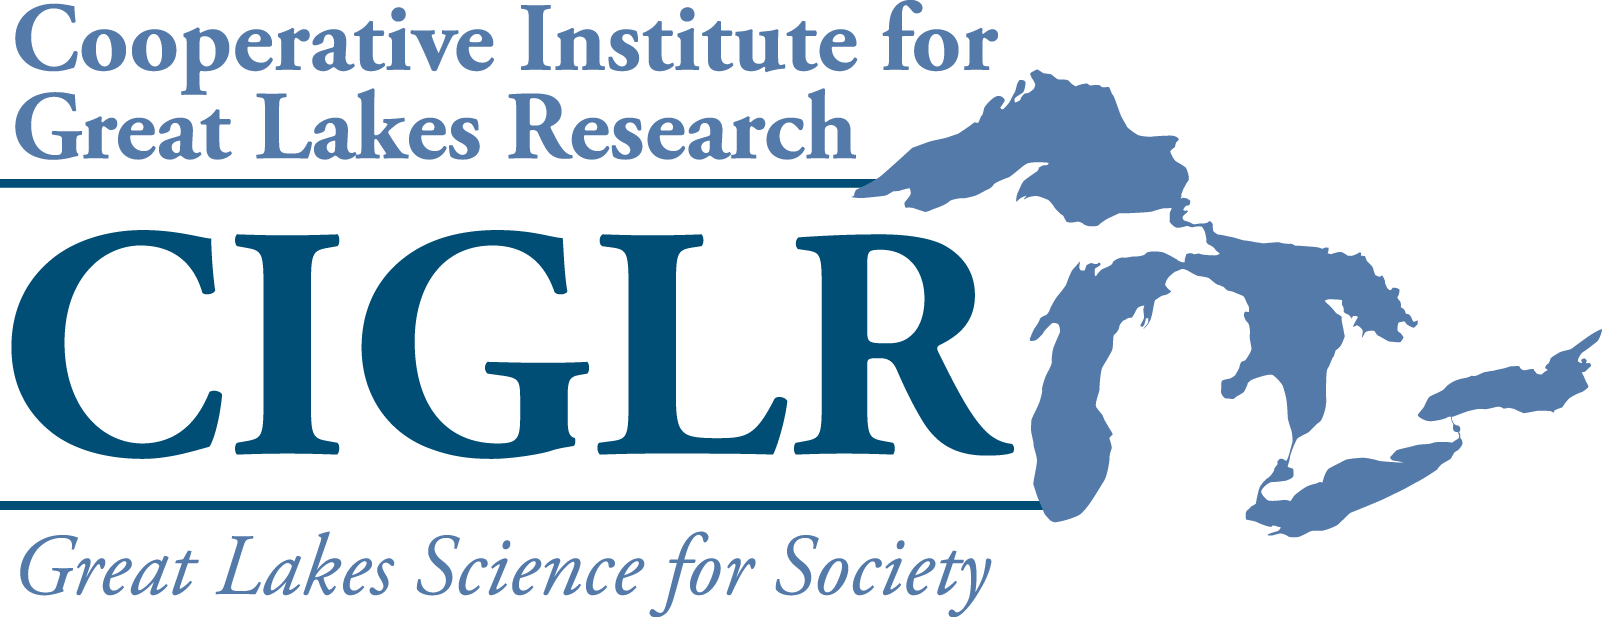 Visit the Cooperative Institute for Great Lakes Research homepage